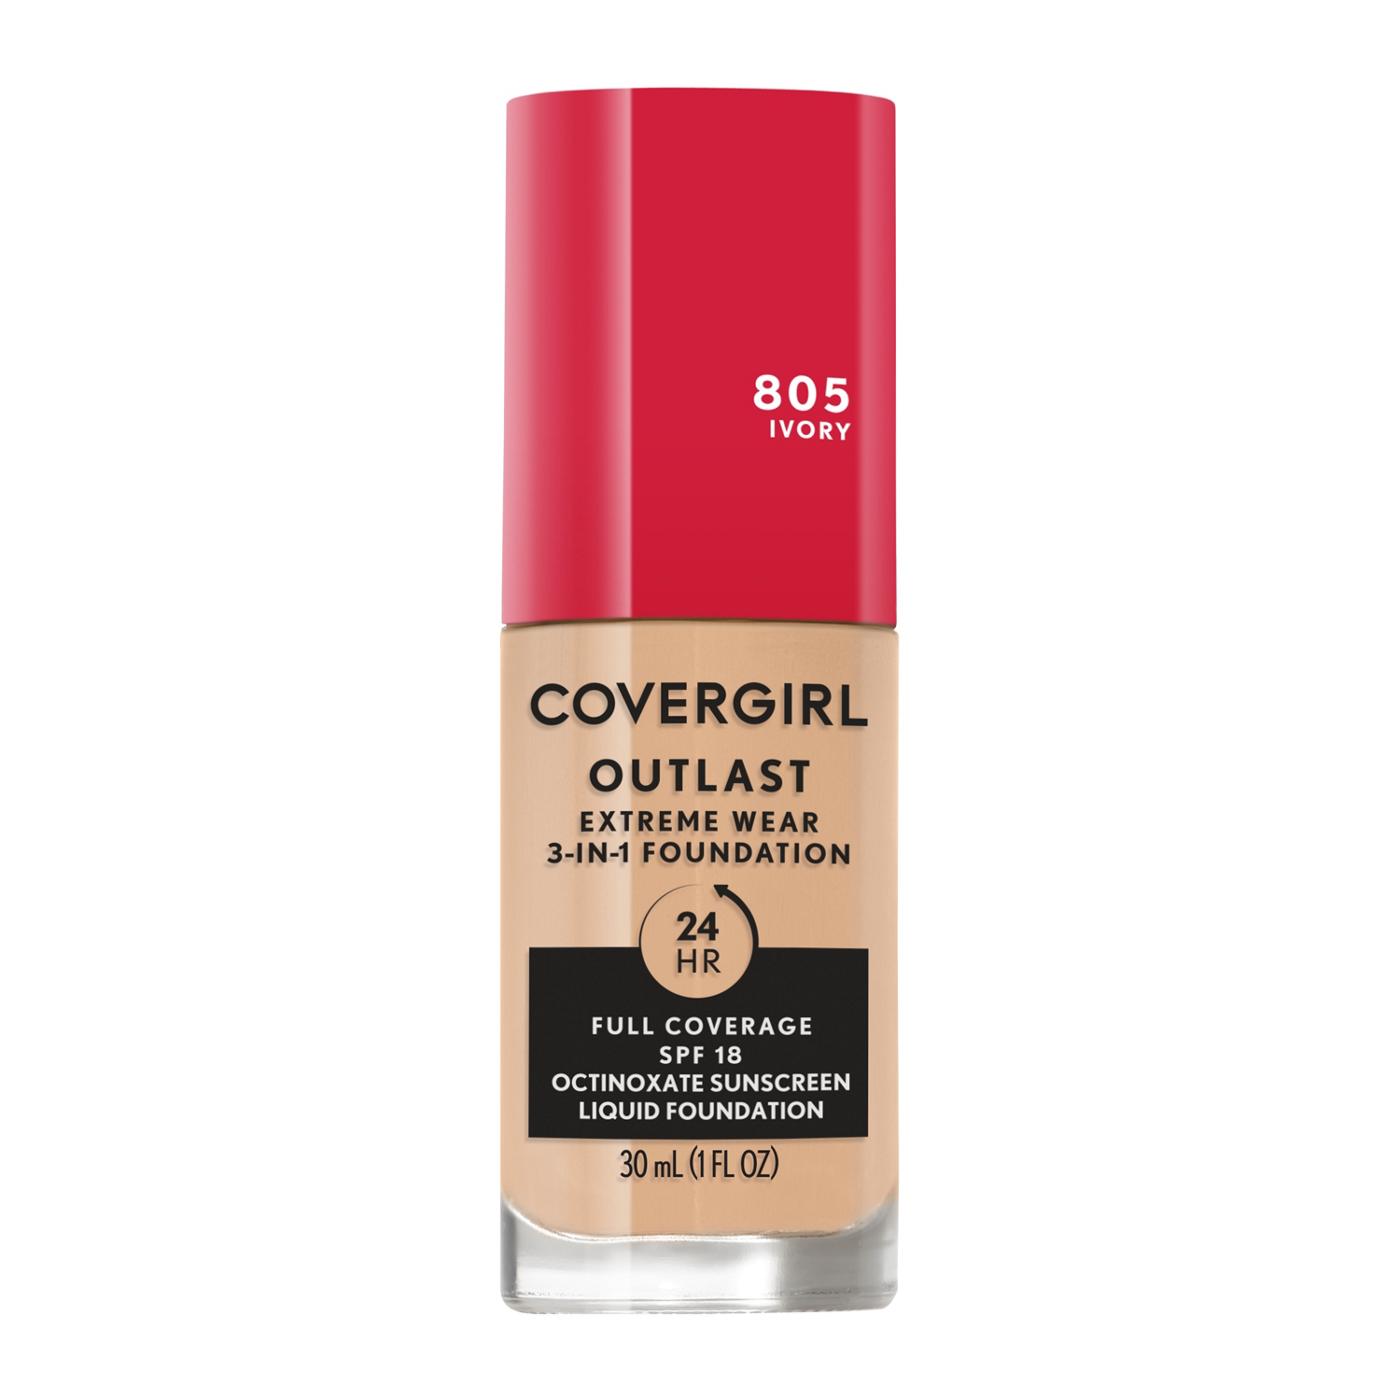 Covergirl Outlast Extreme Wear Liquid Foundation 805 Ivory; image 1 of 11